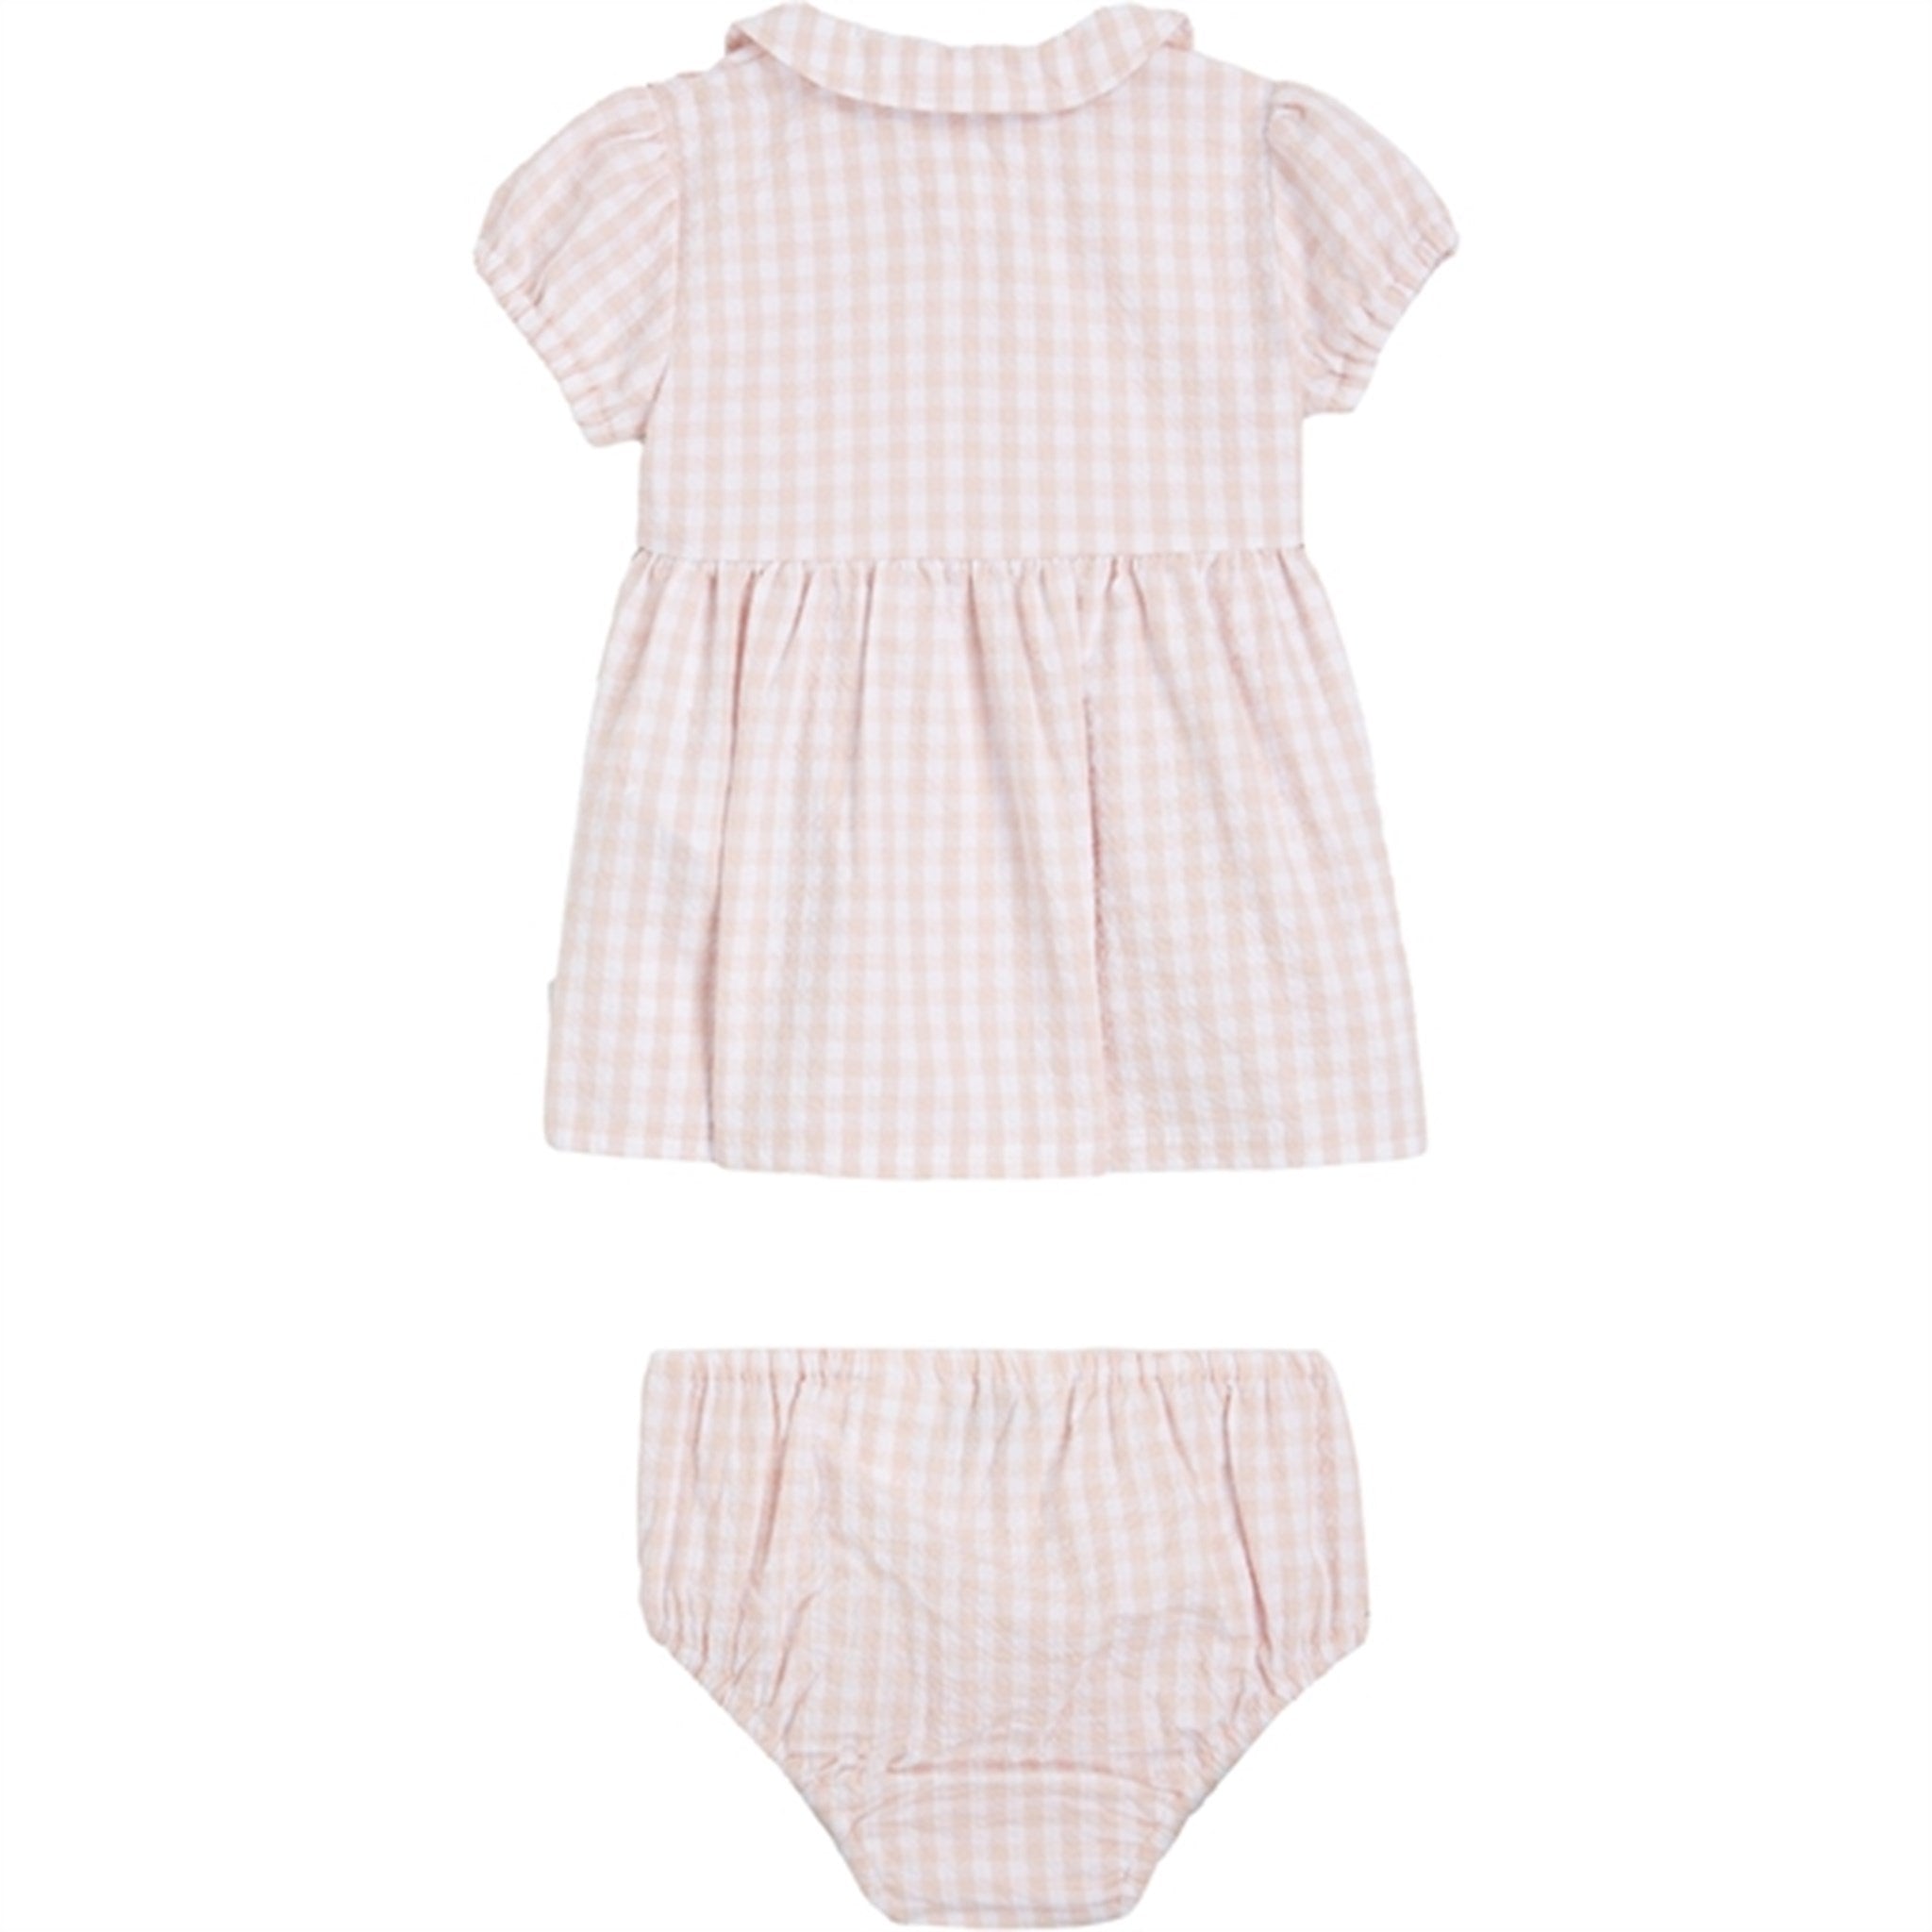 Tommy Hilfiger Baby Gingham Dress White / Pink Check 3